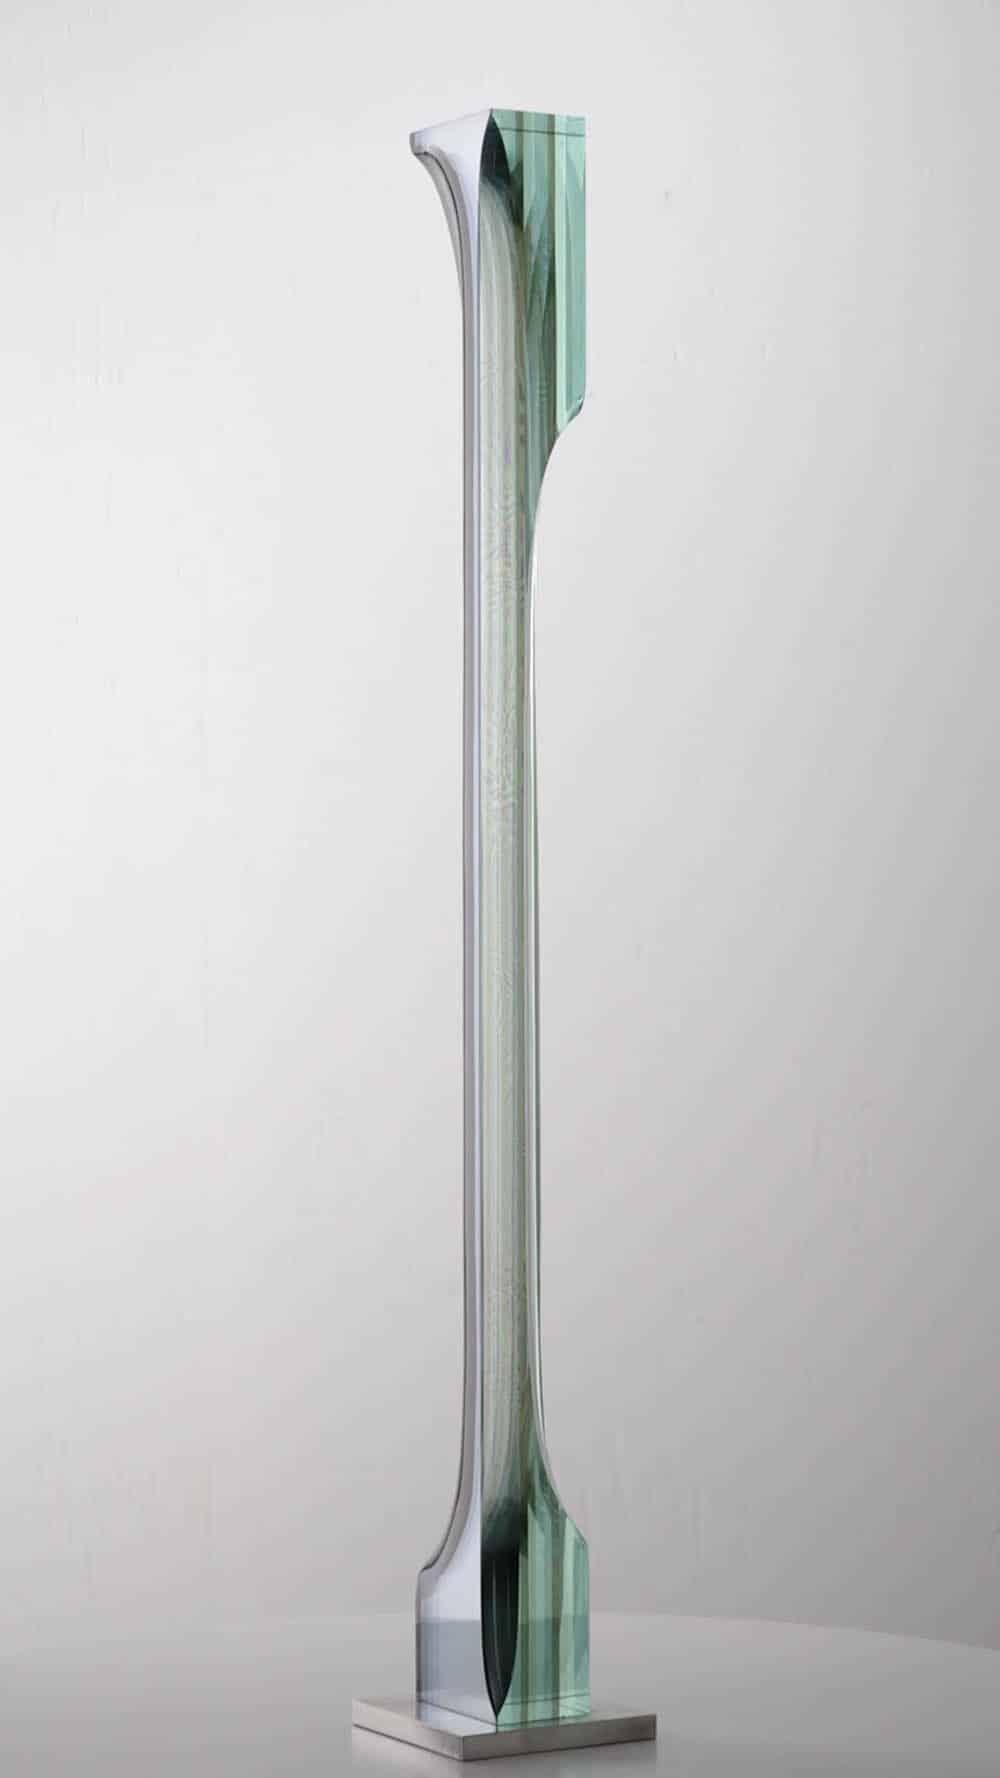 M.140801 by Toshio Iezumi - Contemporary glass sculpture, green, abstract For Sale 1